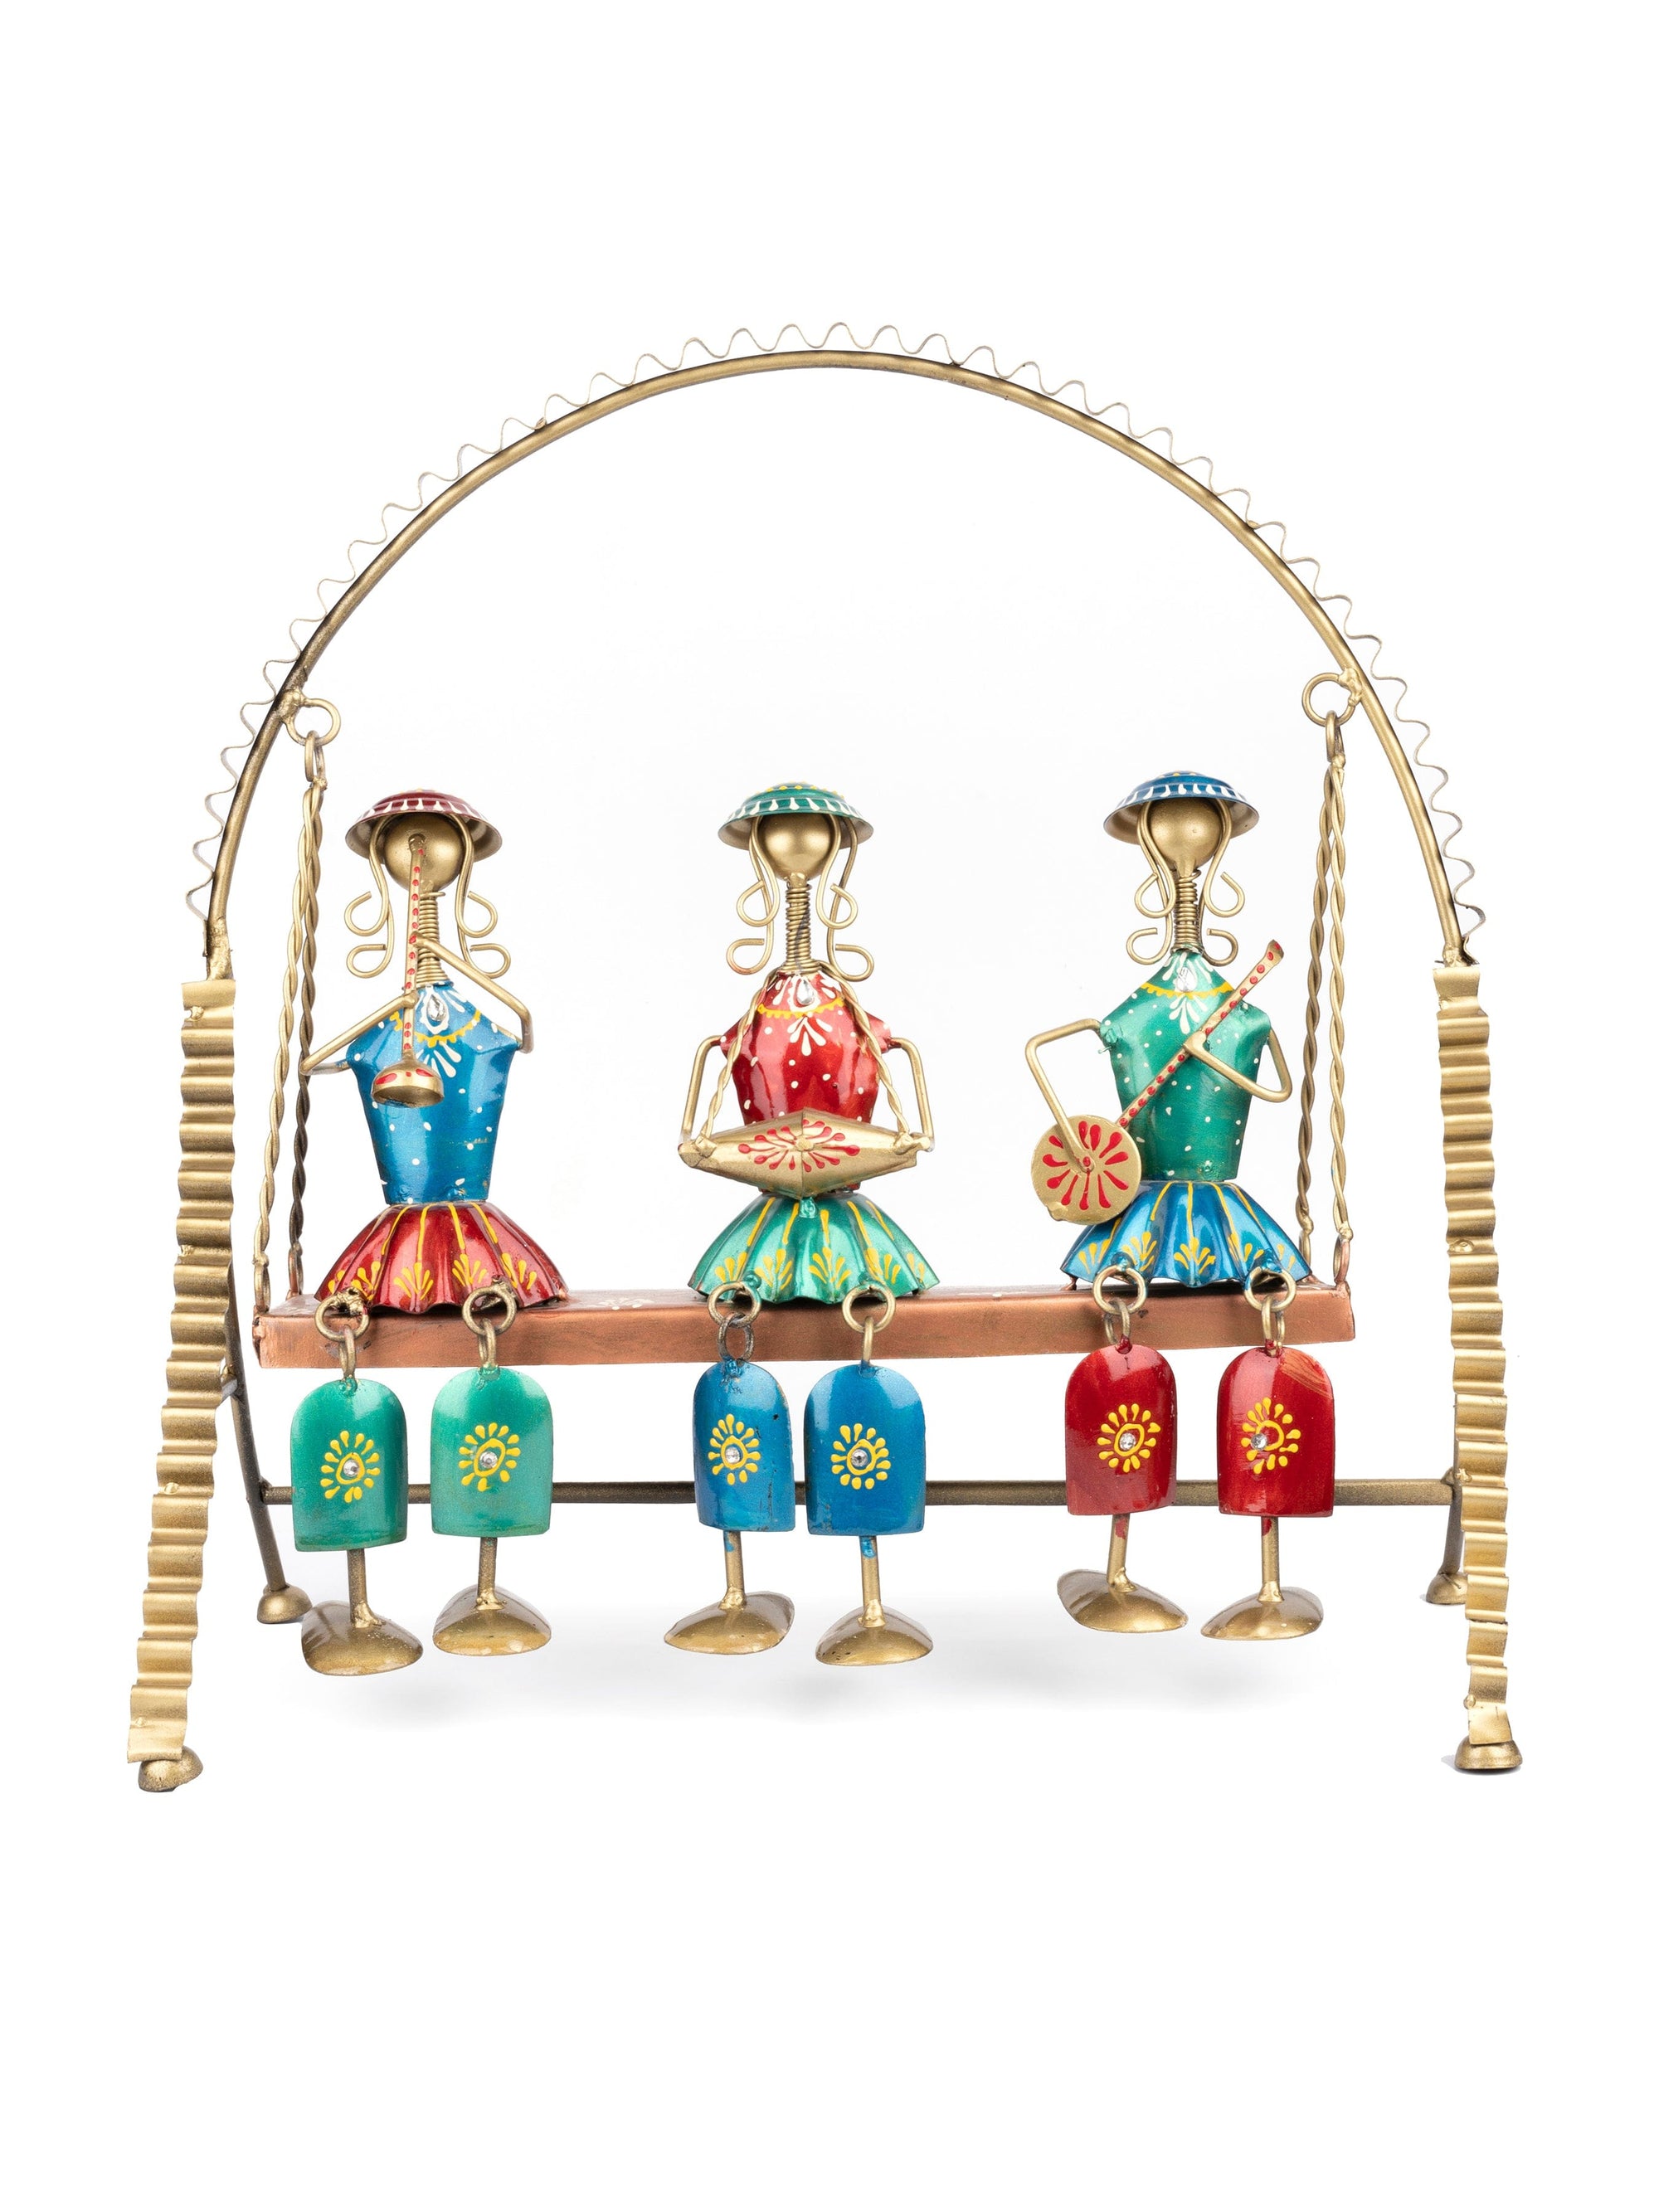 Metal Swing / Jhula with 3 Musician Doll Set - The Heritage Artifacts